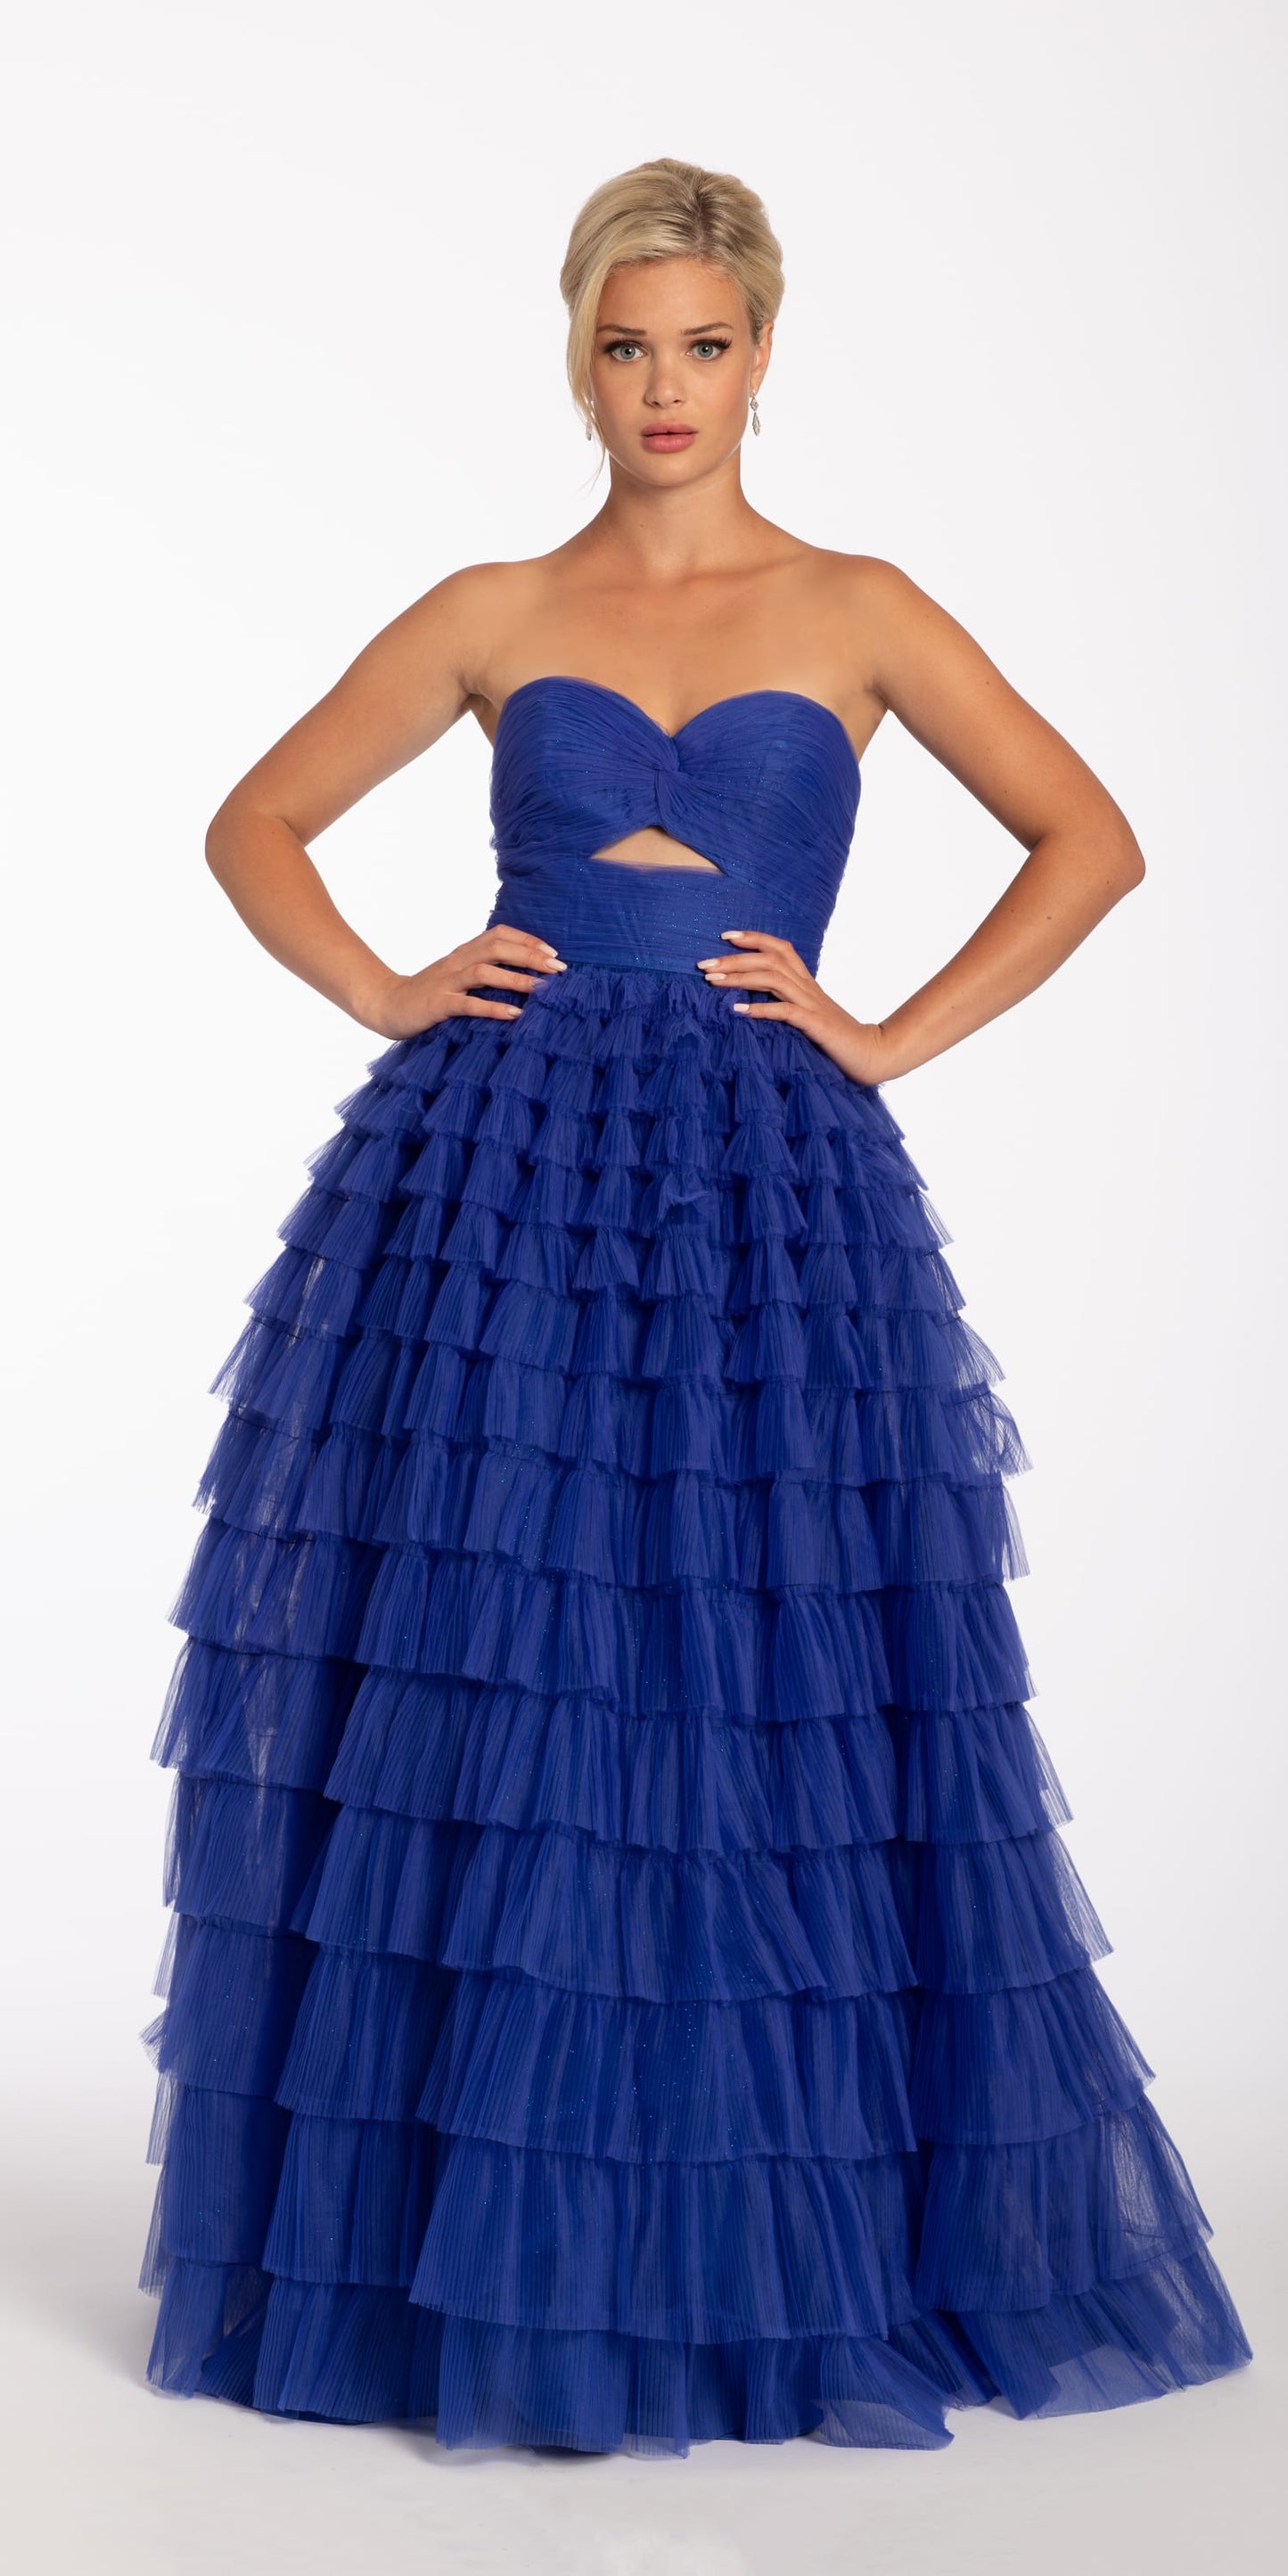 Camille La Vie Pleated Tulle Ballgown with Peek-A-Boo Bodice missy / 0 / dark-blue